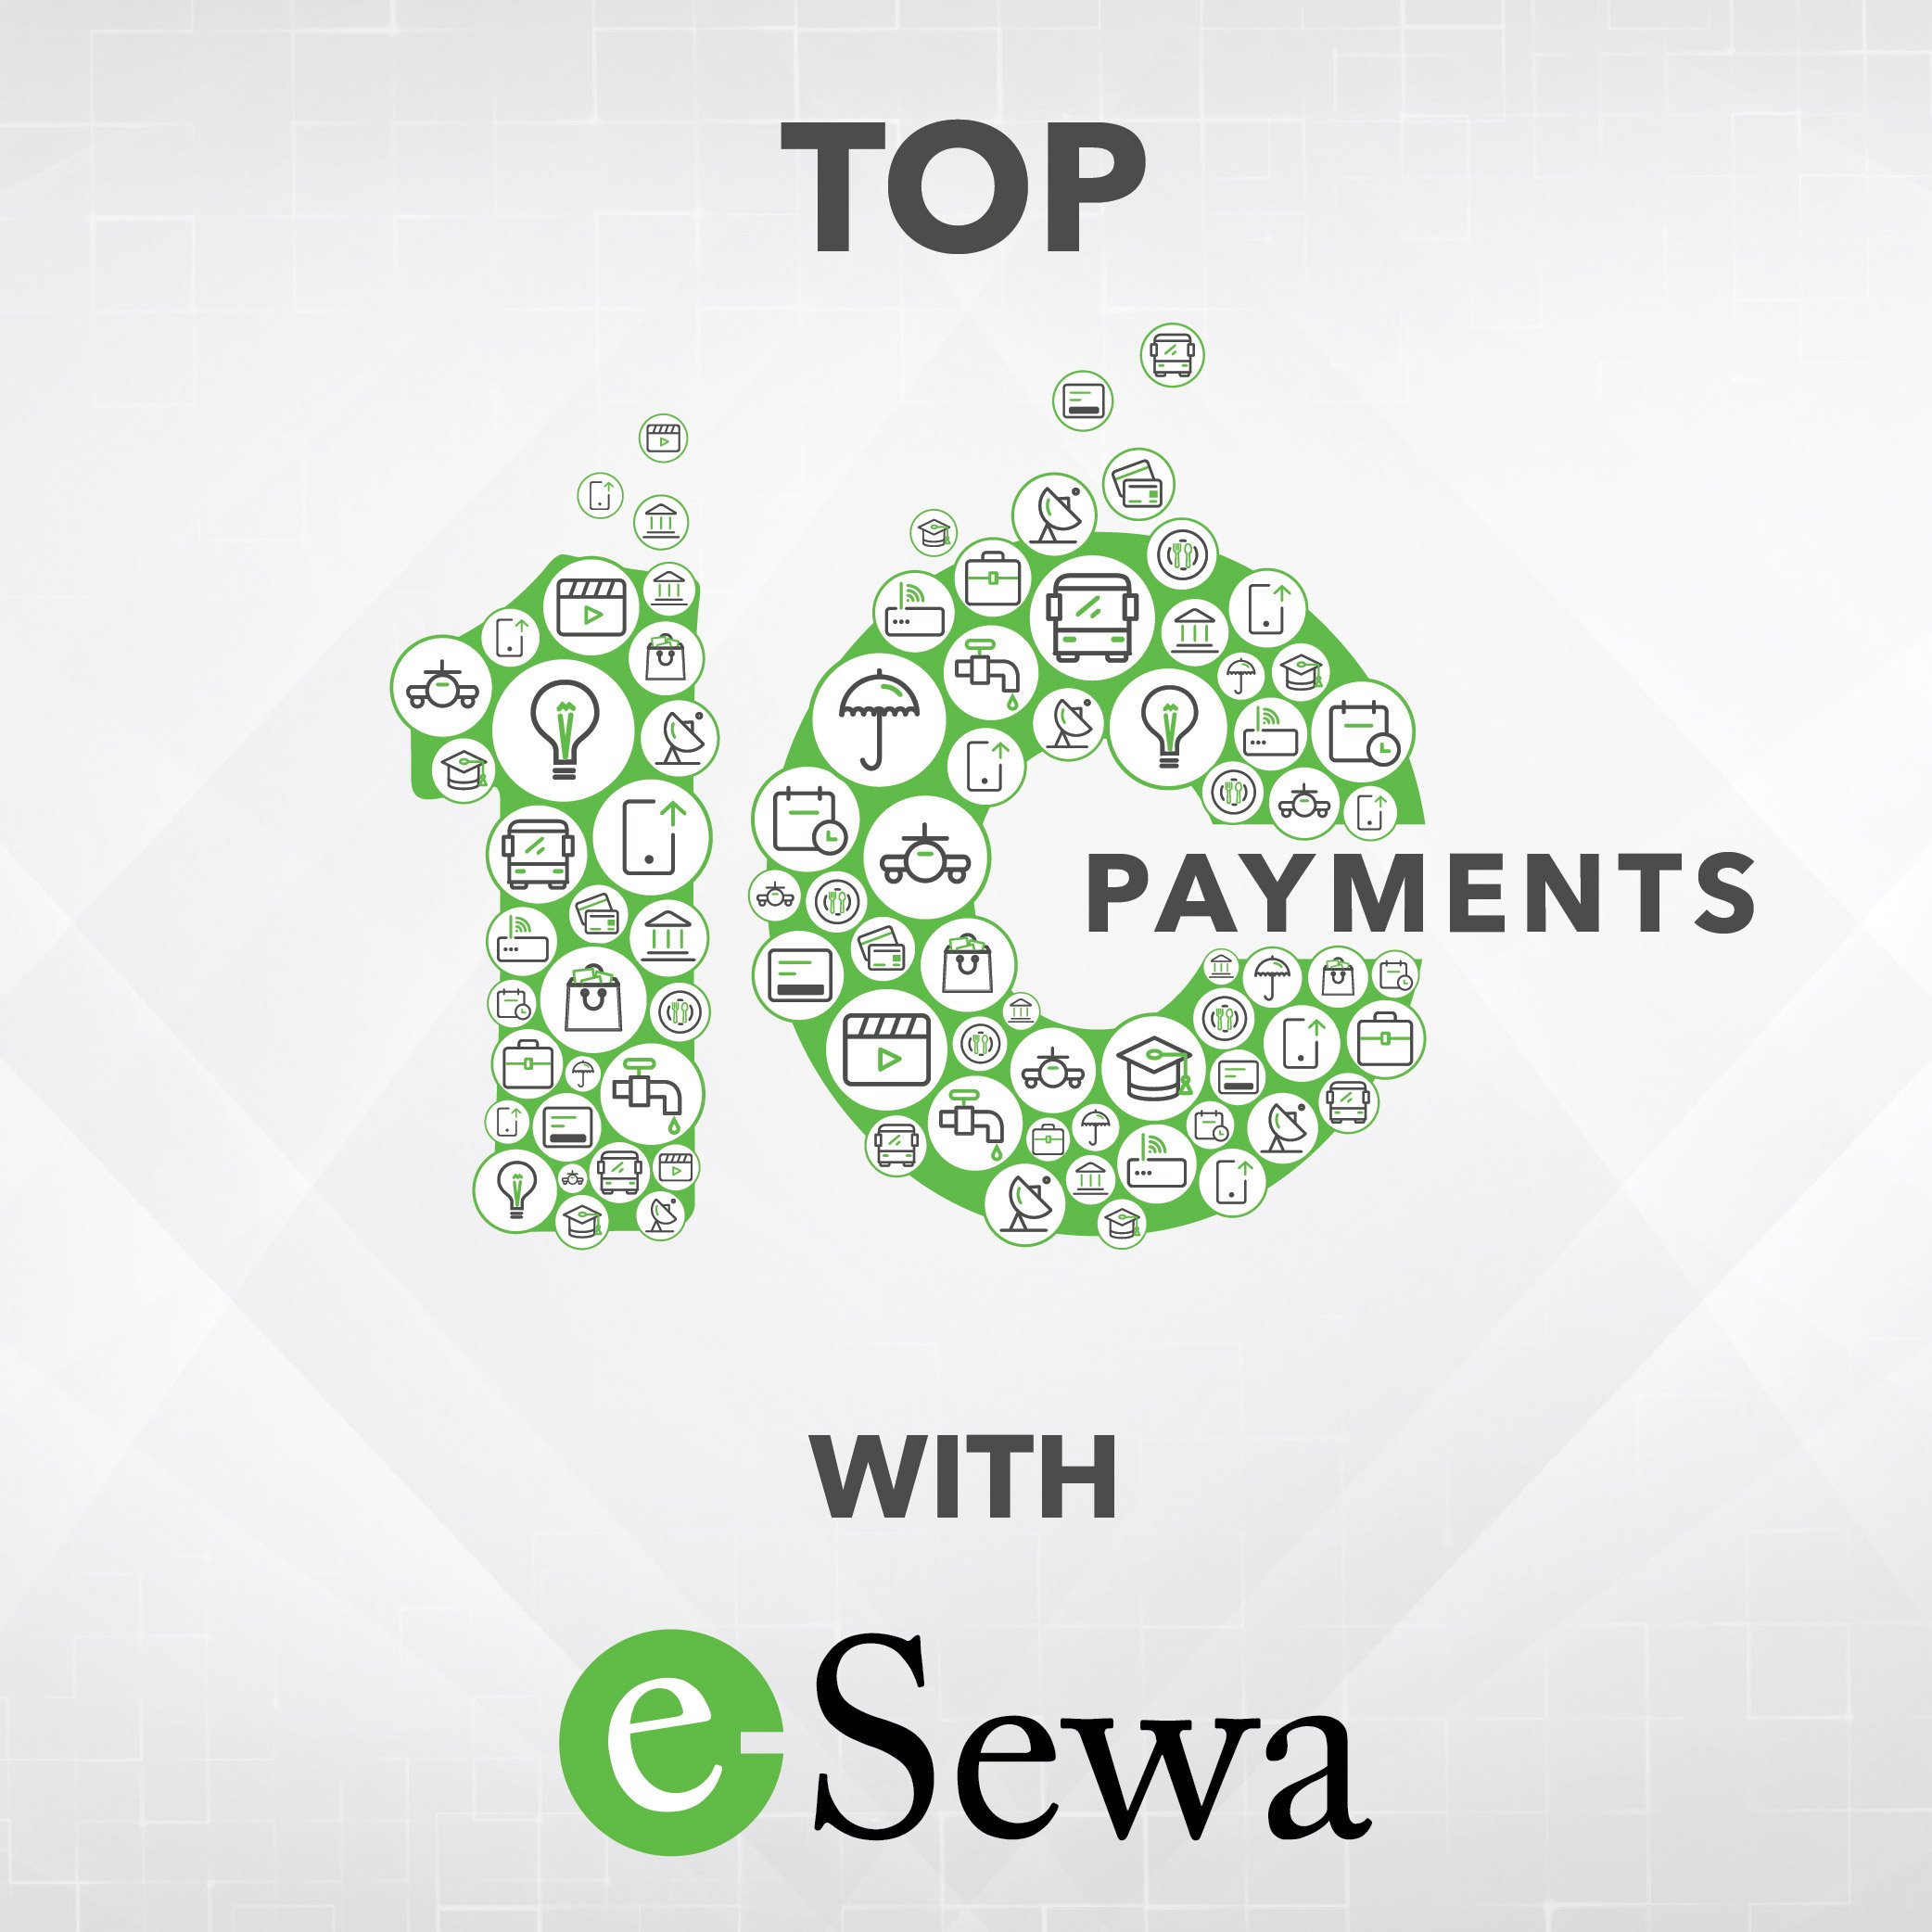 Top 10 payments with eSewa